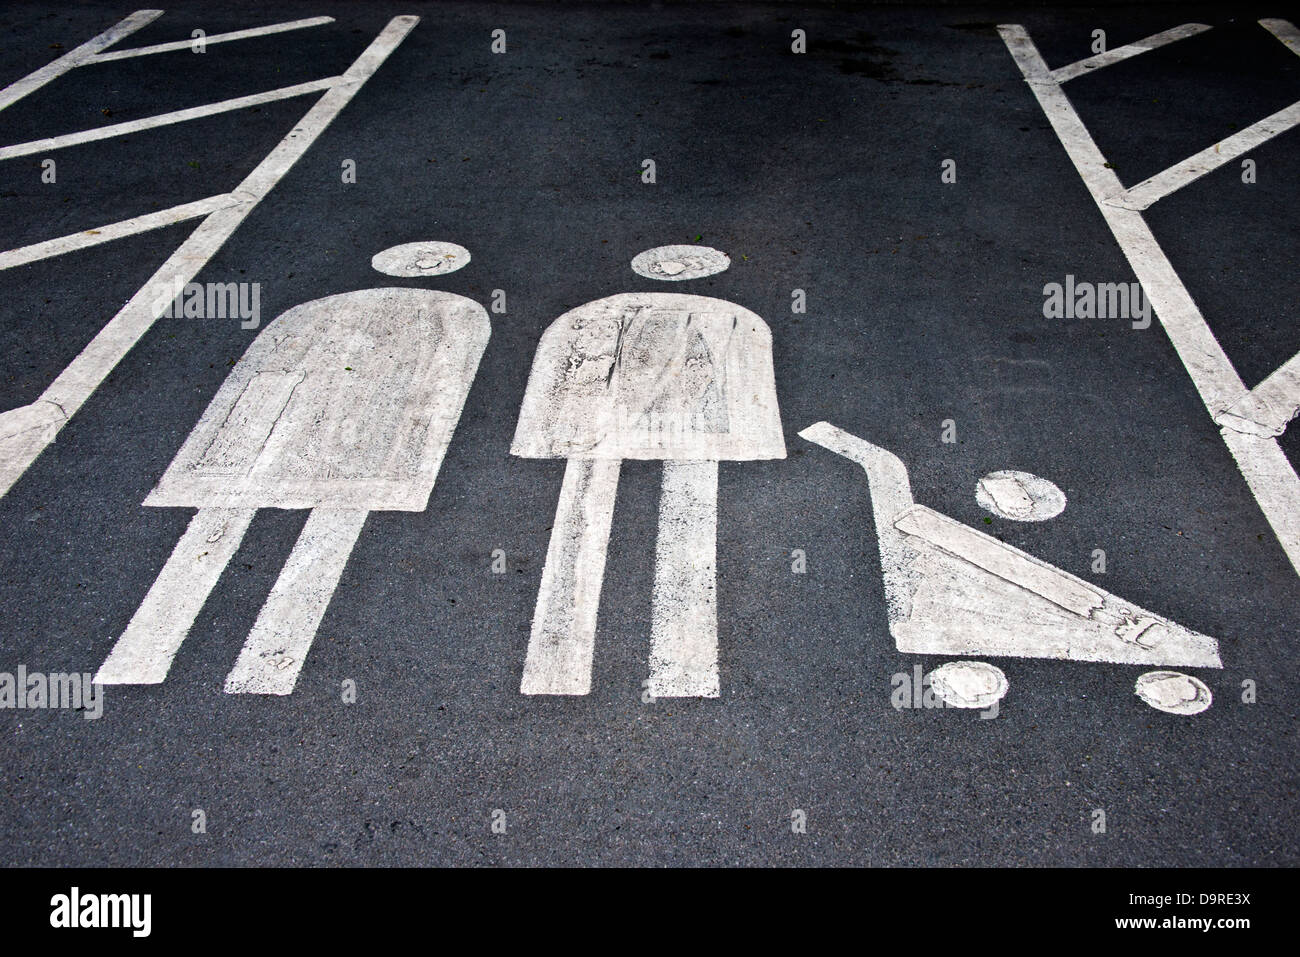 Family Parking Space with symbol on tarmac Stock Photo